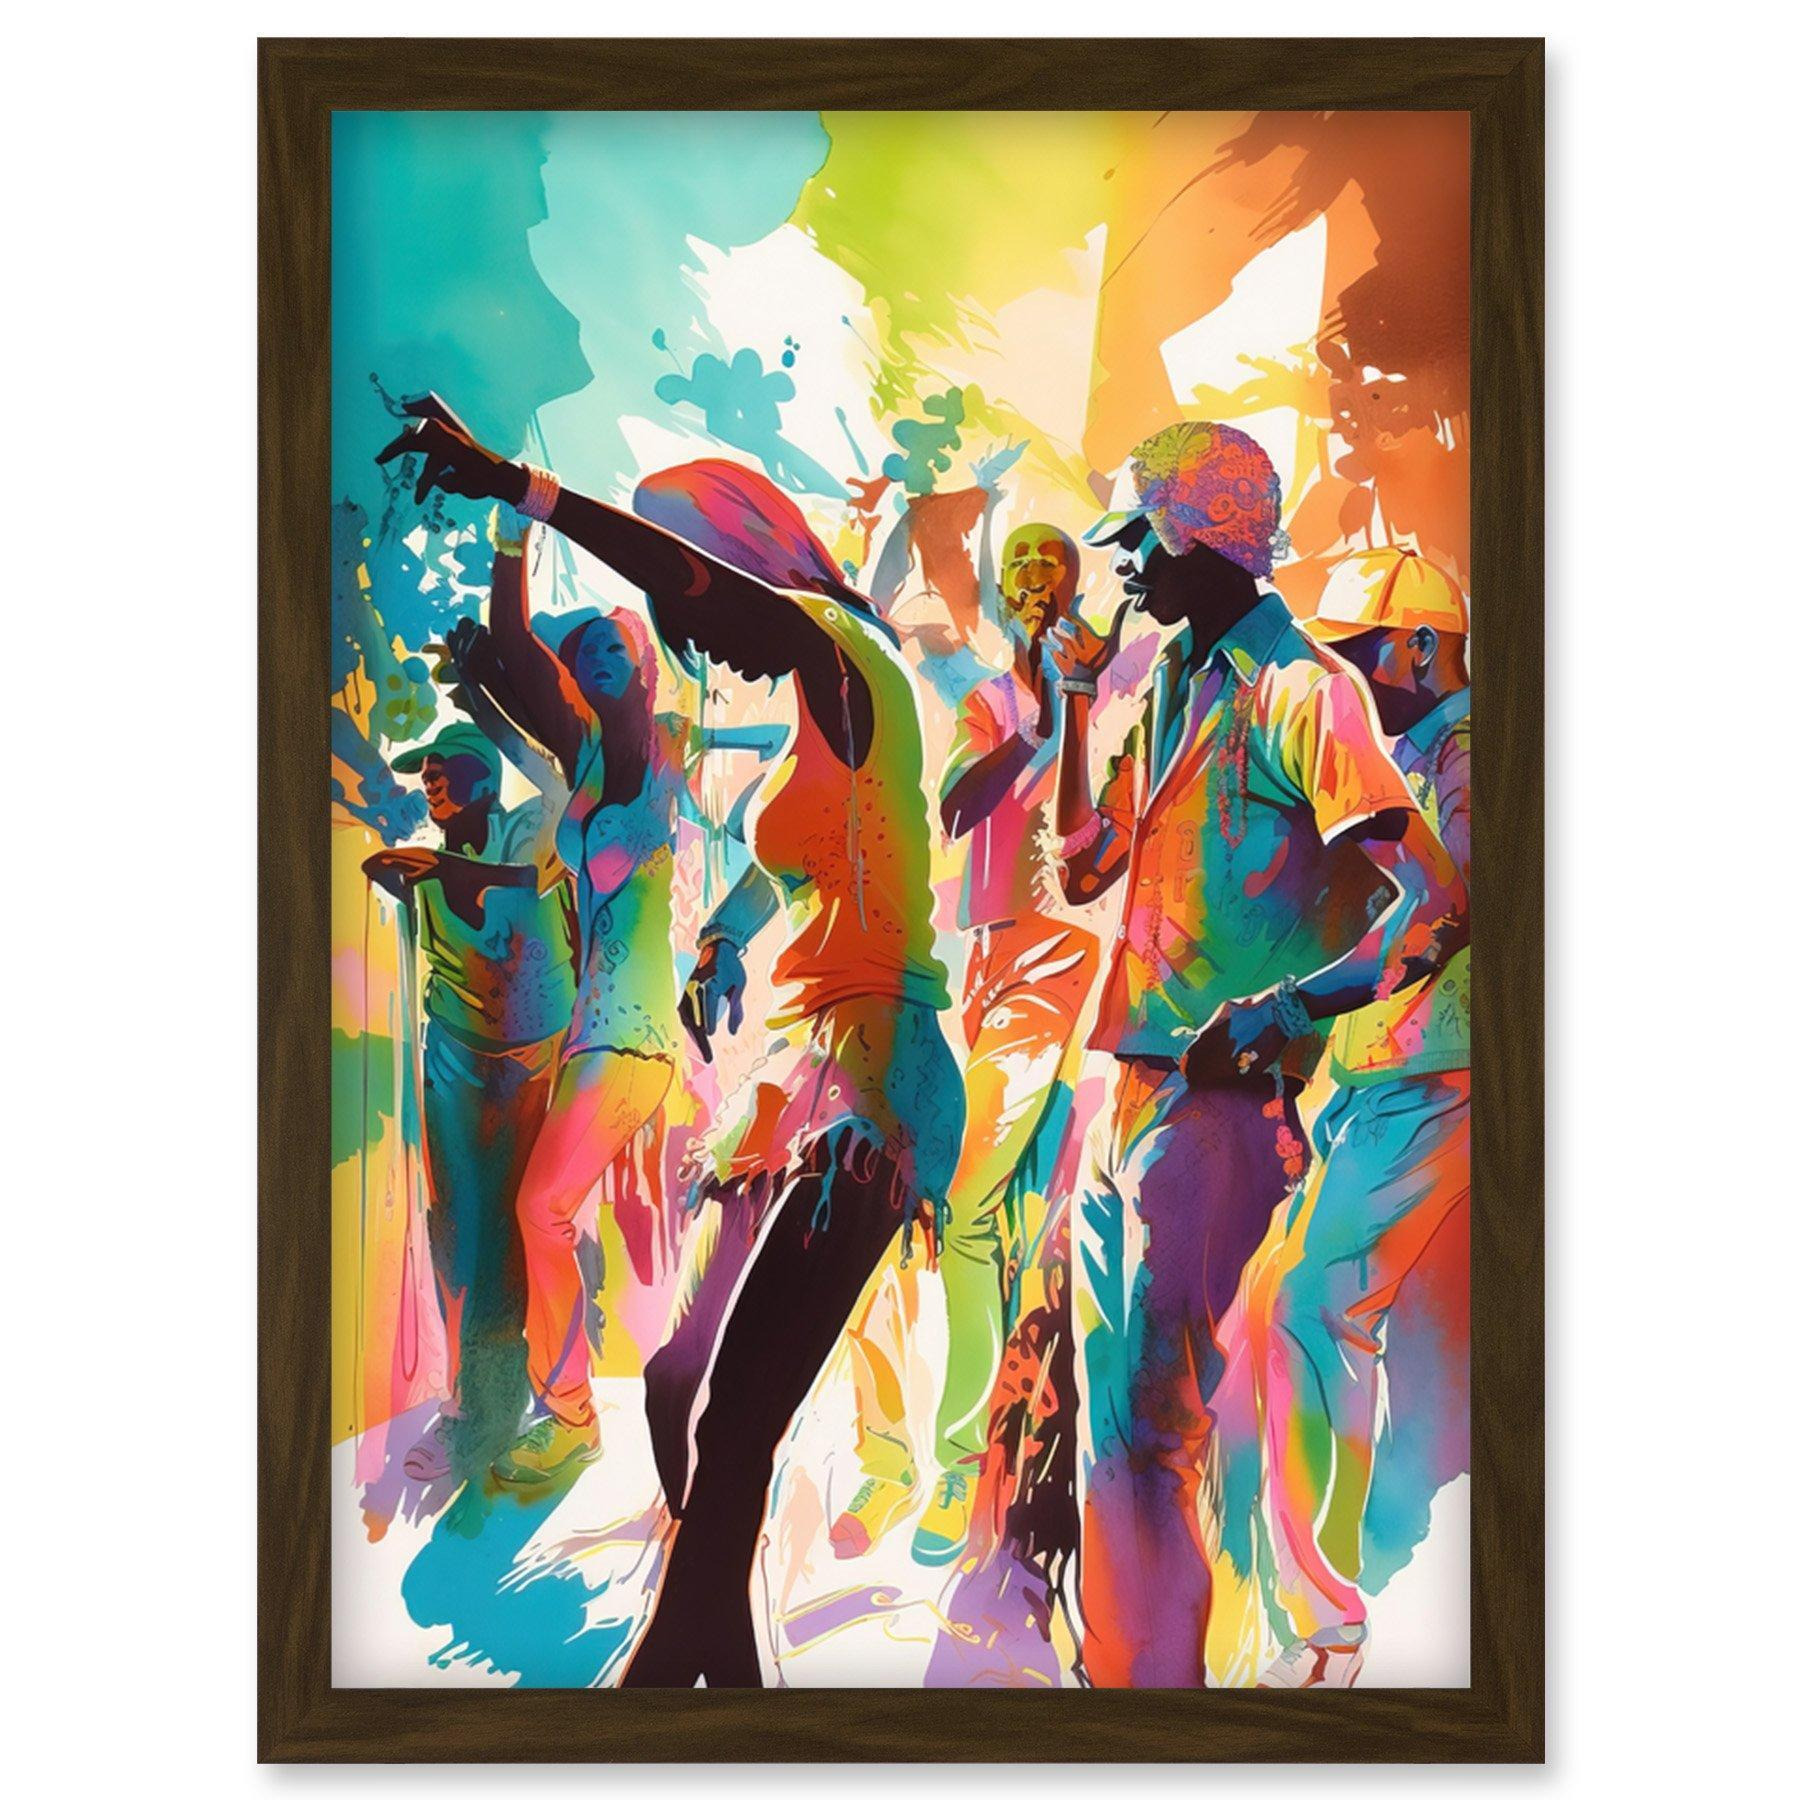 Happy Audience People Dancing to the Beat at Live Concert Gig Modern Rainbow Illustration Artwork Framed Wall Art Print A4 - image 1